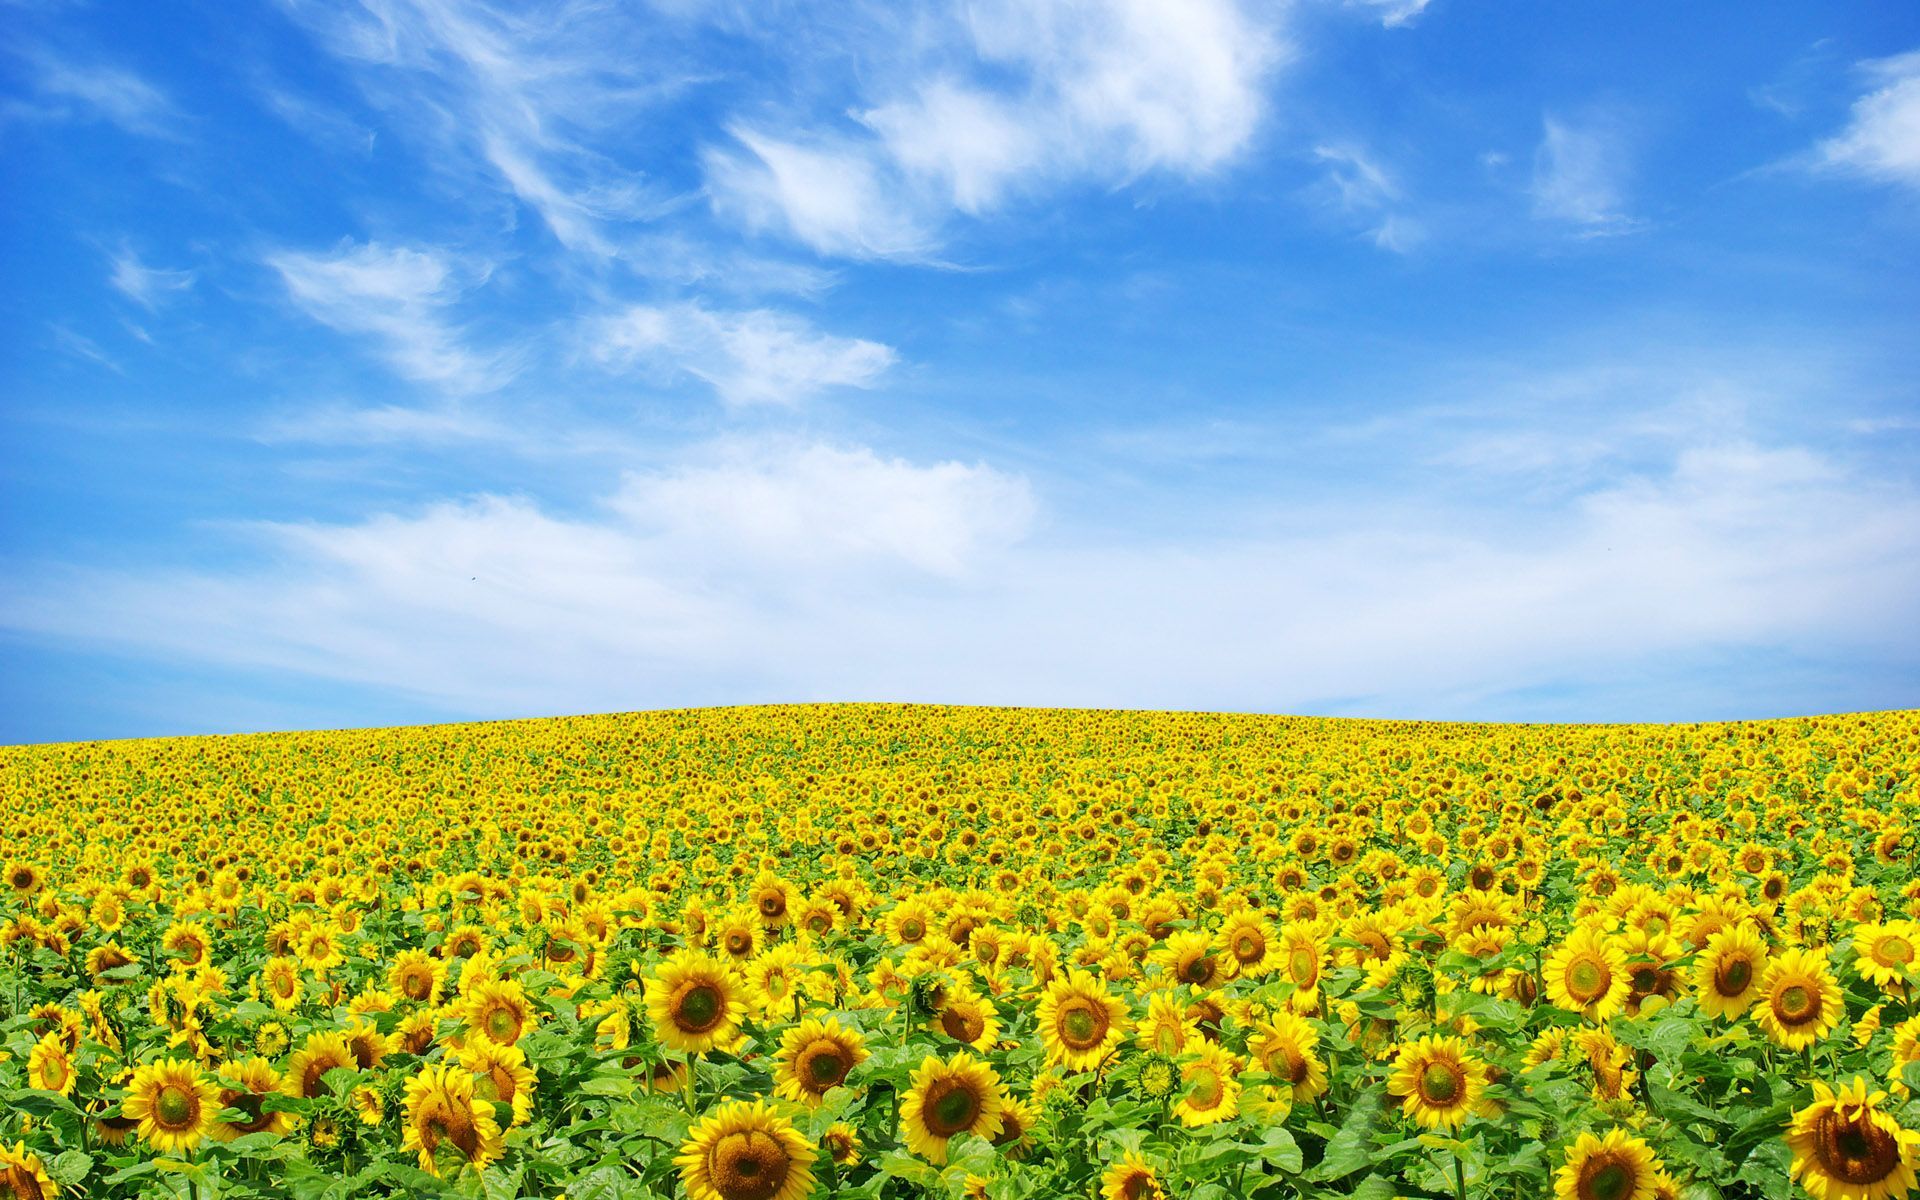 Wallpapers Tagged With SUNFLOWER | SUNFLOWER HD Wallpapers | Page 1